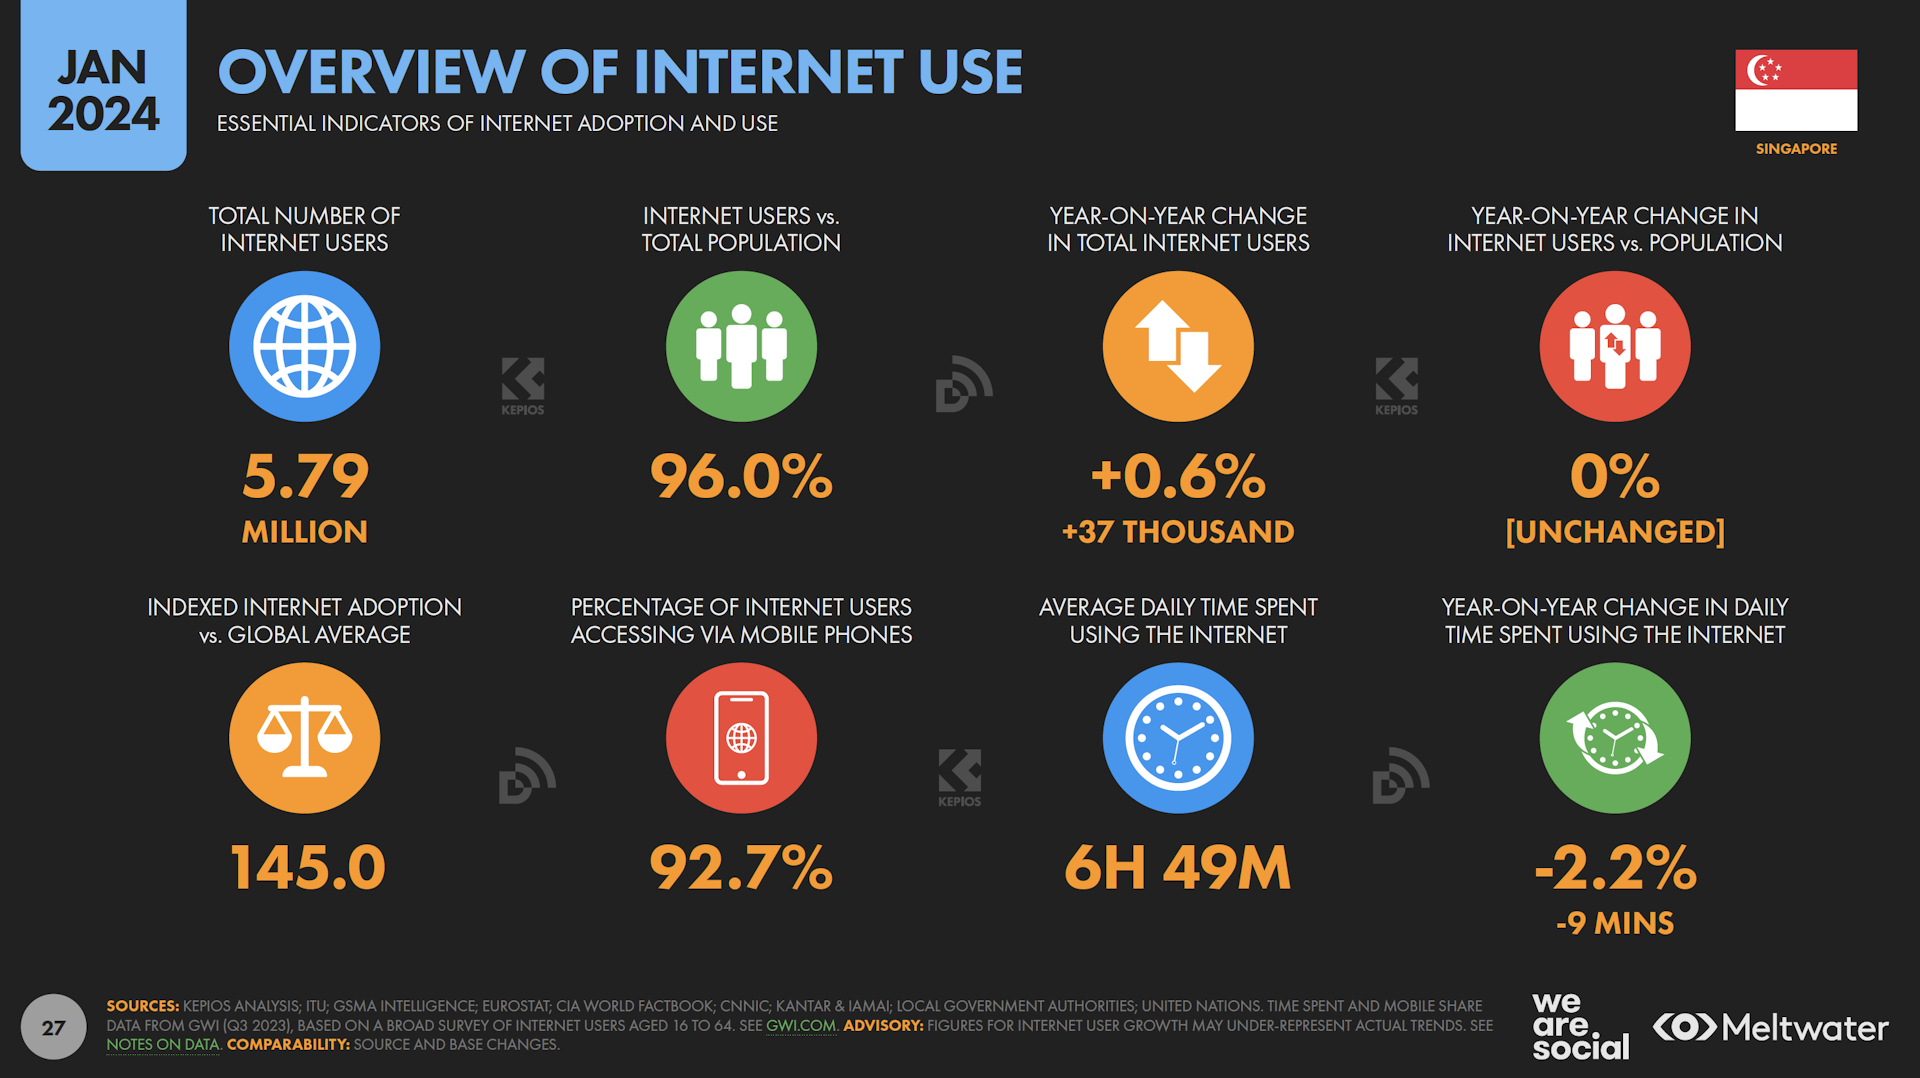 Overview of internet use based on Global Digital Report 2024 for Singapore